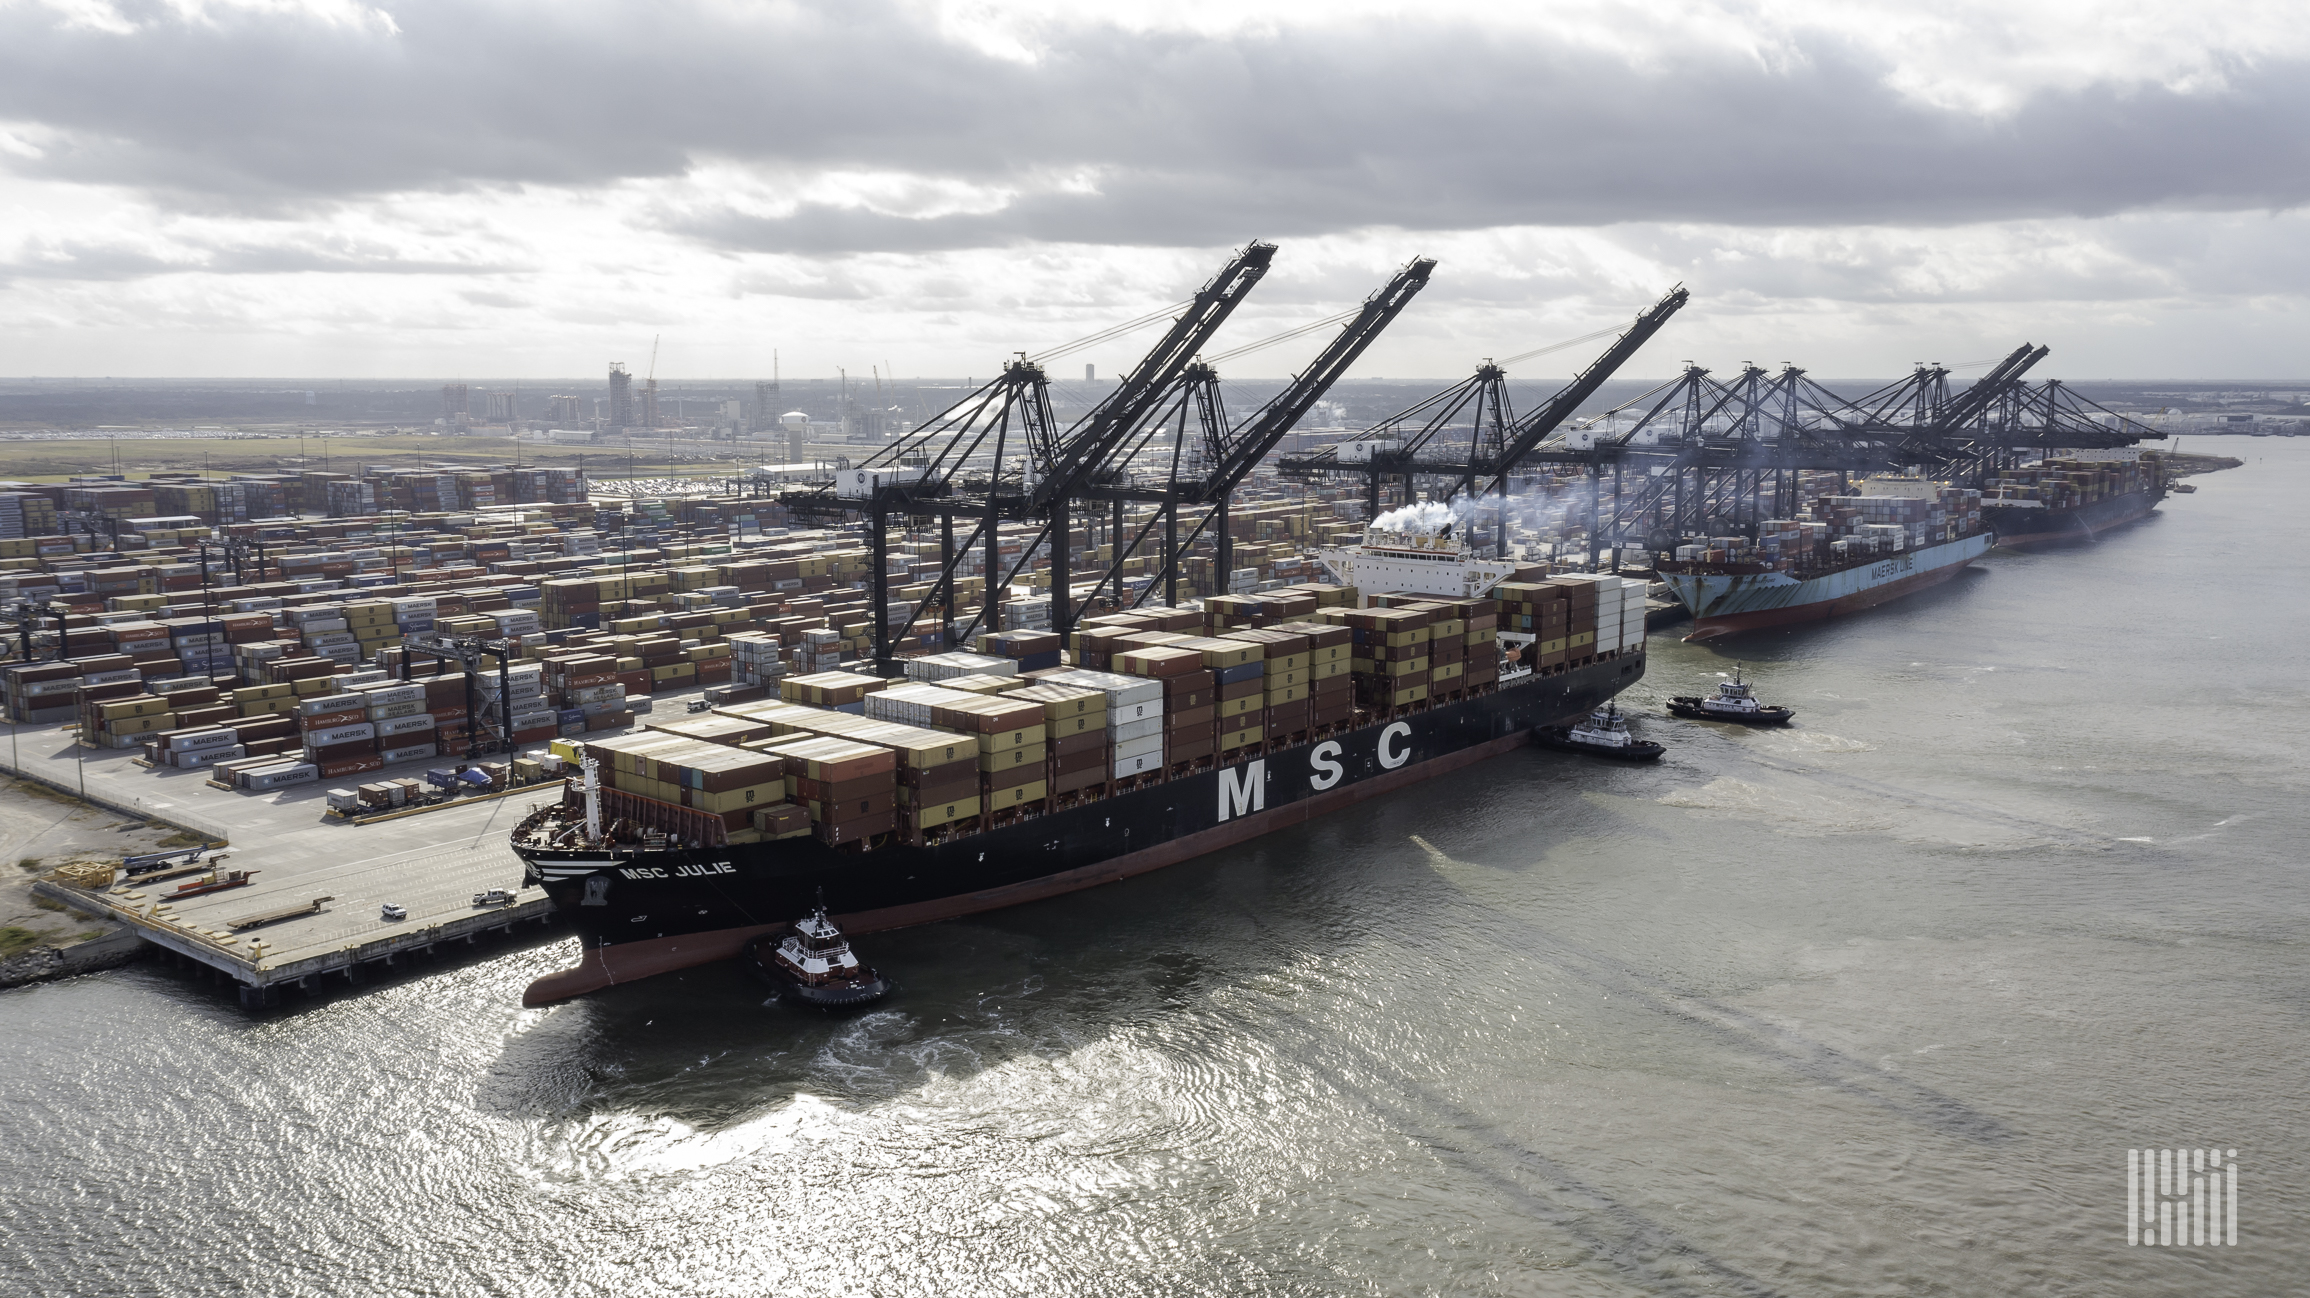 The World Shipping Council identified six key elements to decarbonize the shipping industry.